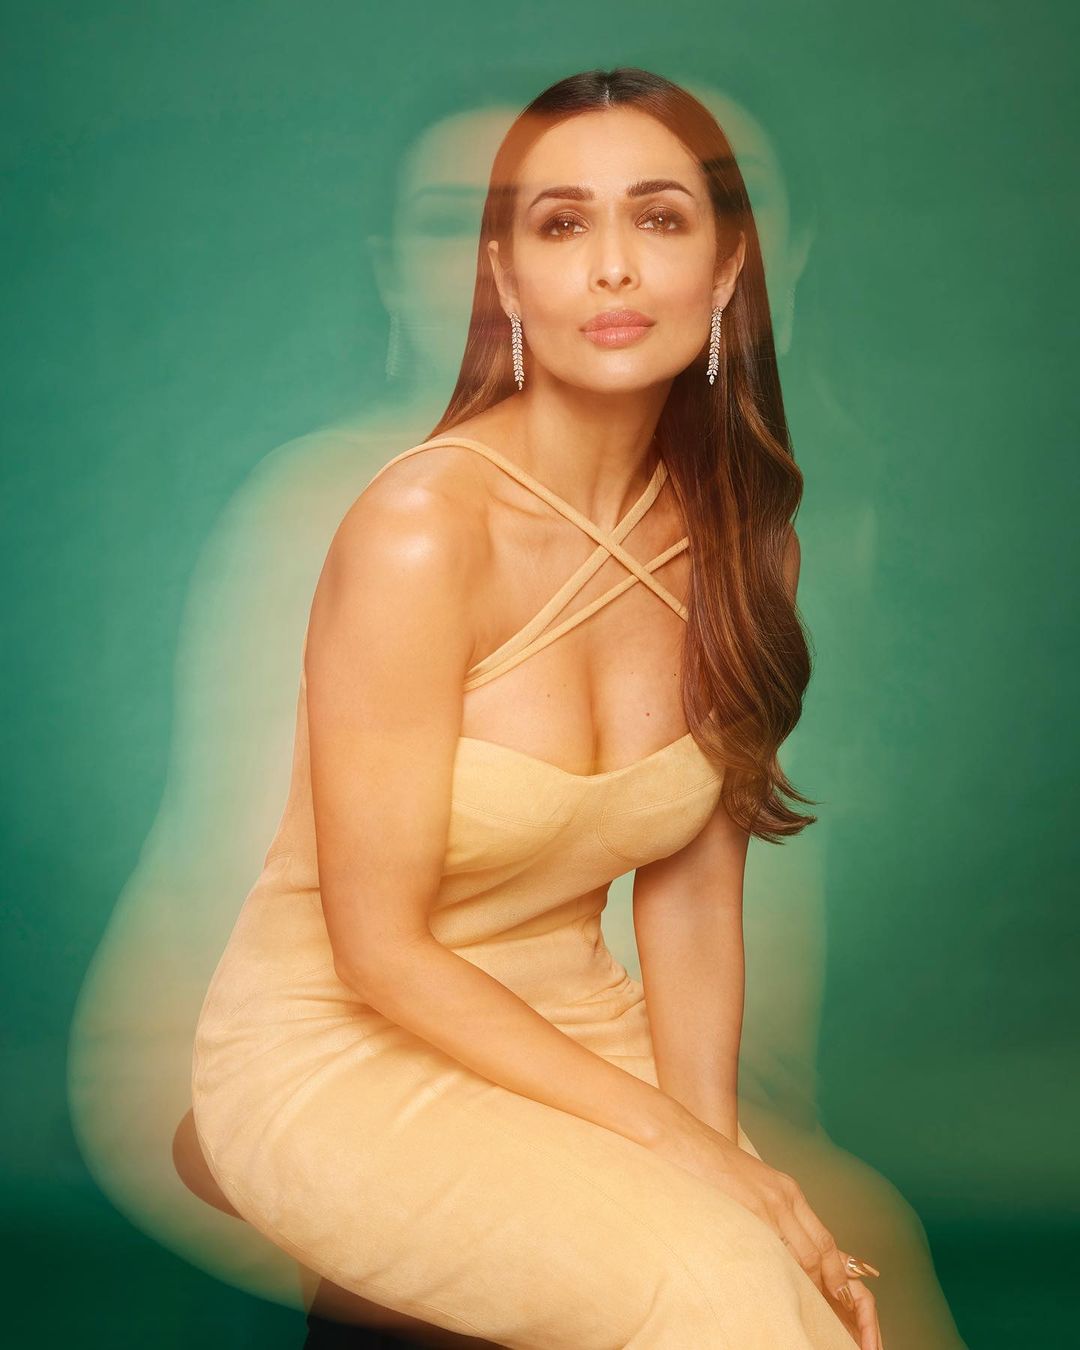 Malaika Arora looks stunning in a cleavage-baring yellow dress in her latest photoshoot.